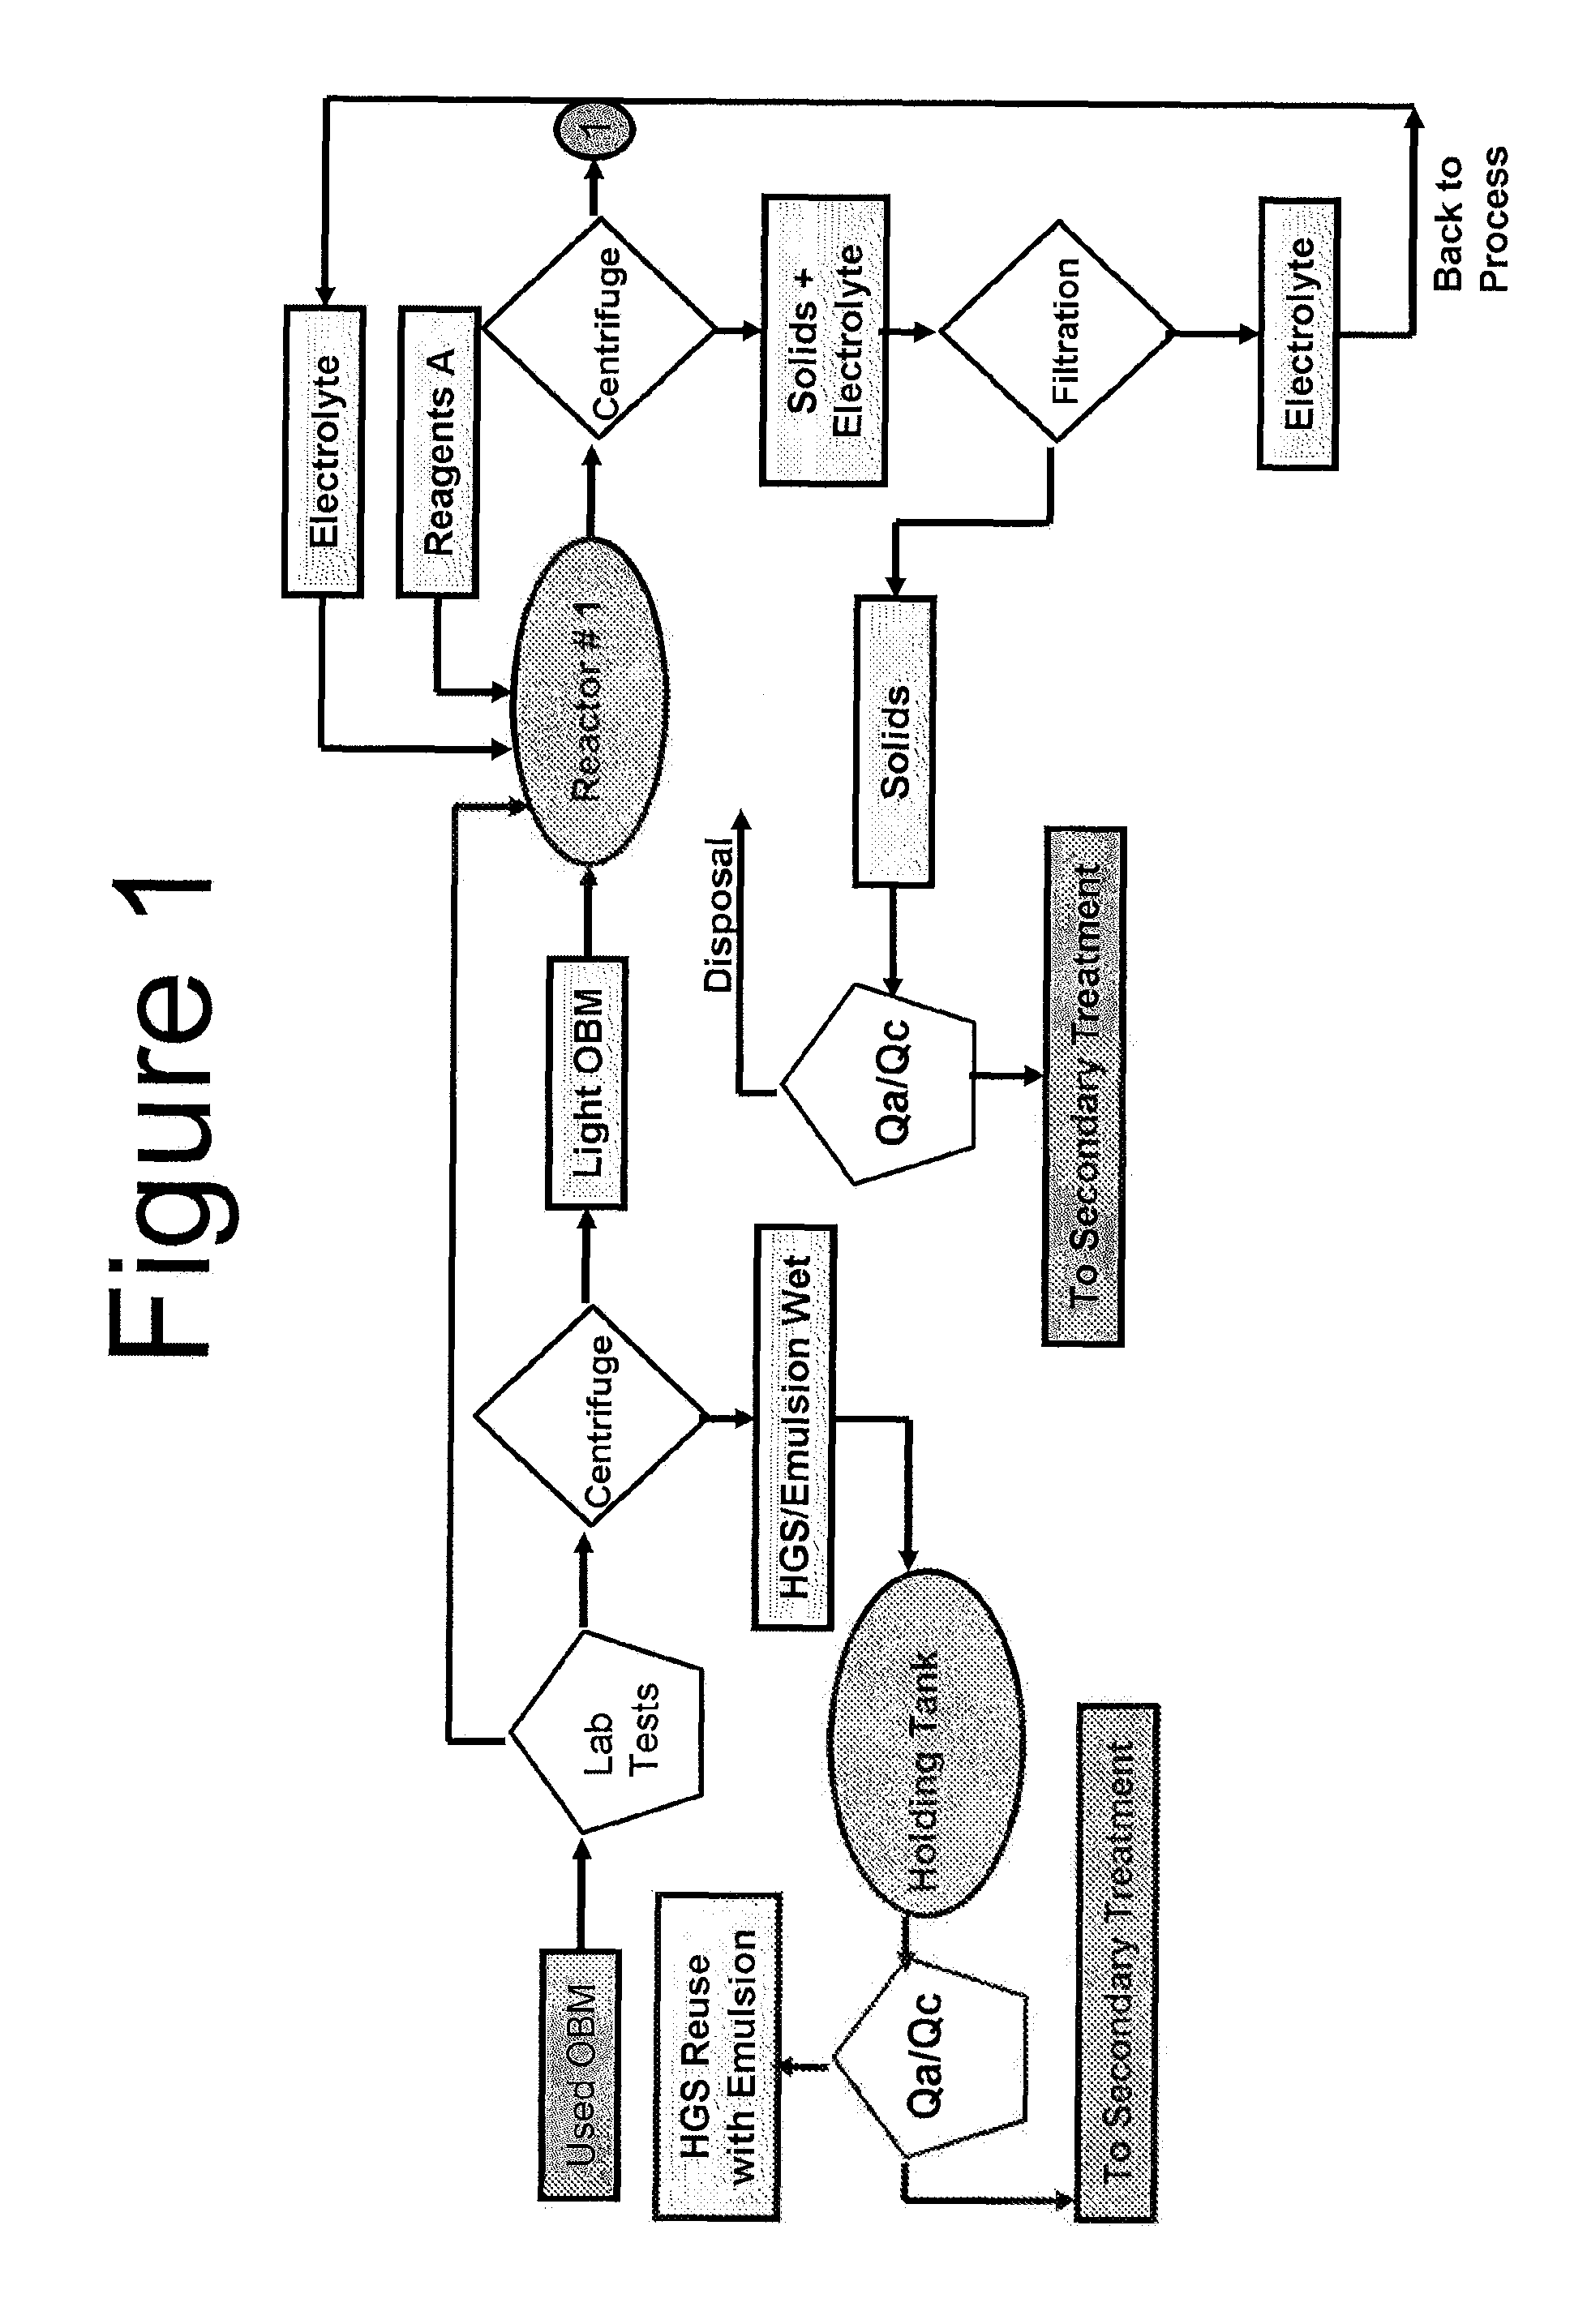 Method and system to recover usable oil-based drilling muds from used and unacceptable oil-based drilling muds